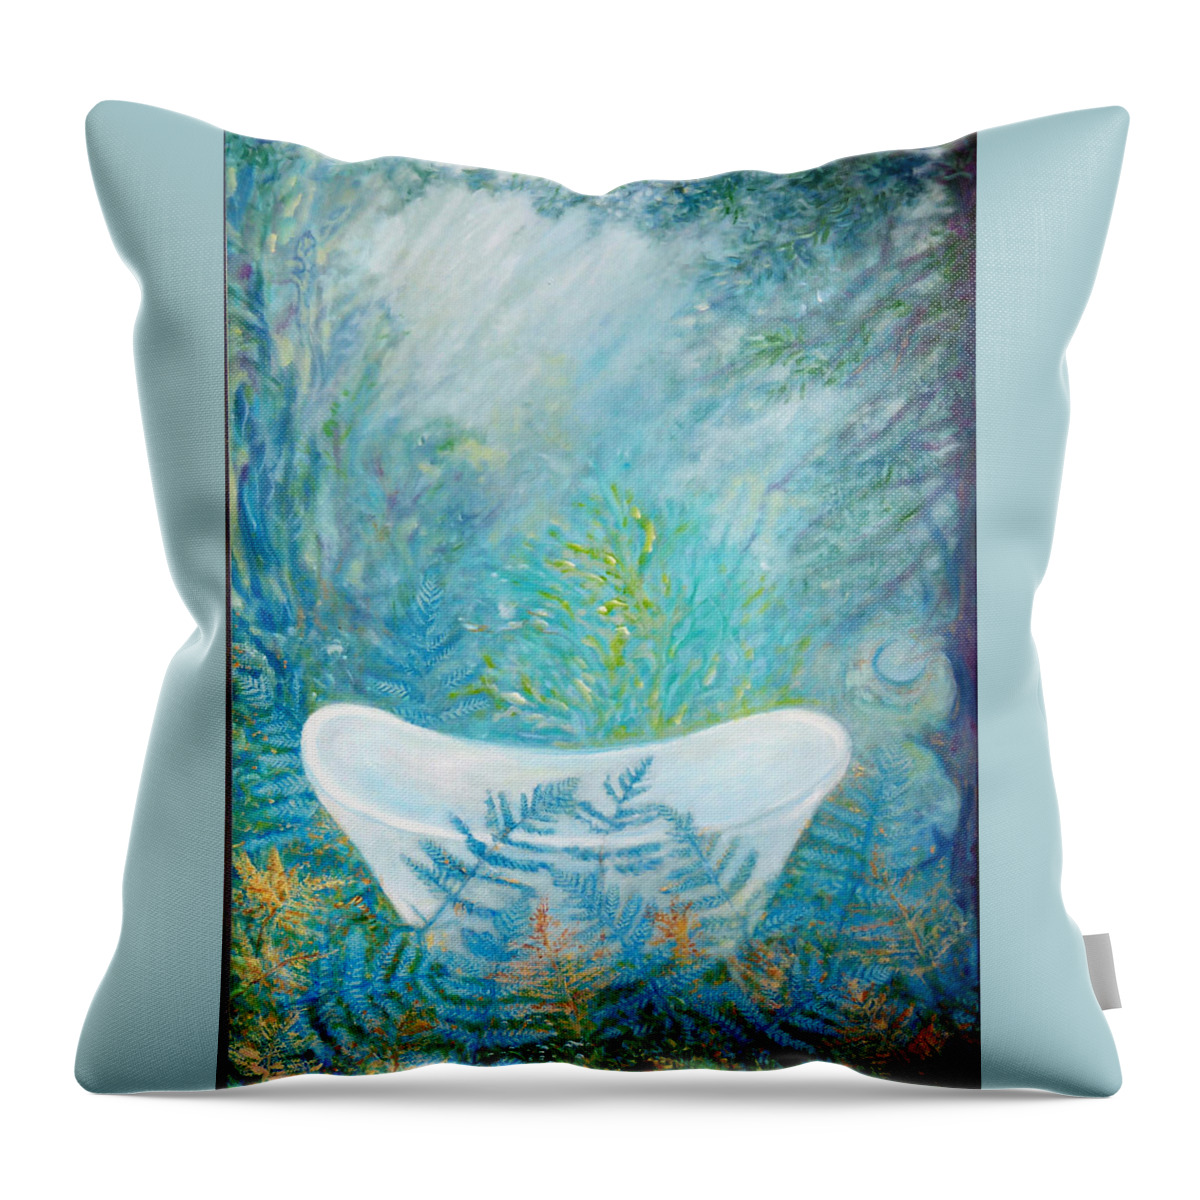 Repose Throw Pillow featuring the painting Repose by Elzbieta Goszczycka